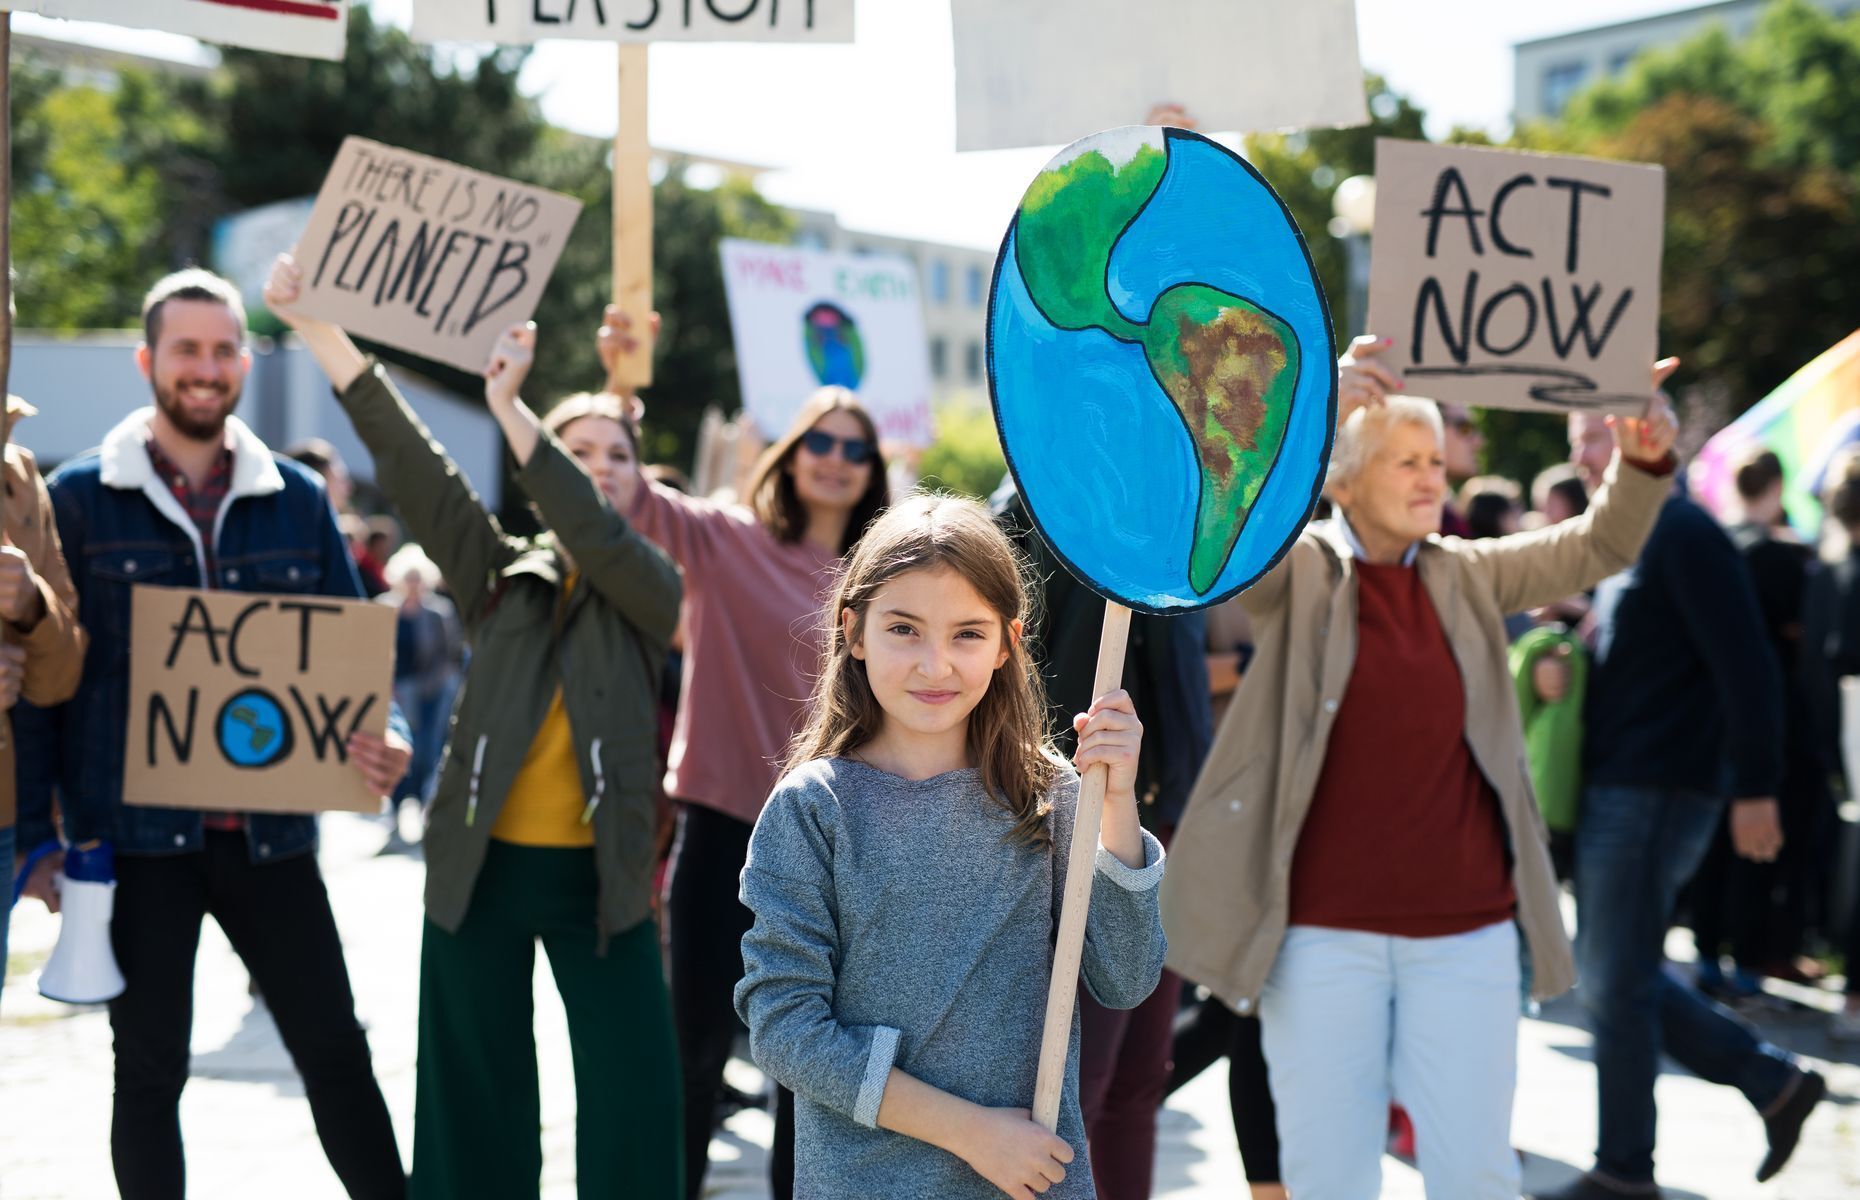 Younger generations are particularly <a href="https://www2.deloitte.com/global/en/pages/about-deloitte/articles/genzmillennialsurvey.html" rel="noreferrer noopener">sensitive to environmental issues</a>. In addition to feeling that the climate crisis is being ignored, they believe <a href="https://studyfinds.org/baby-boomers-climate-change/" rel="noreferrer noopener">baby boomers have made things worse</a>, they have little confidence that their government is doing enough, and try to adopt personal habits that are more planet-friendly.